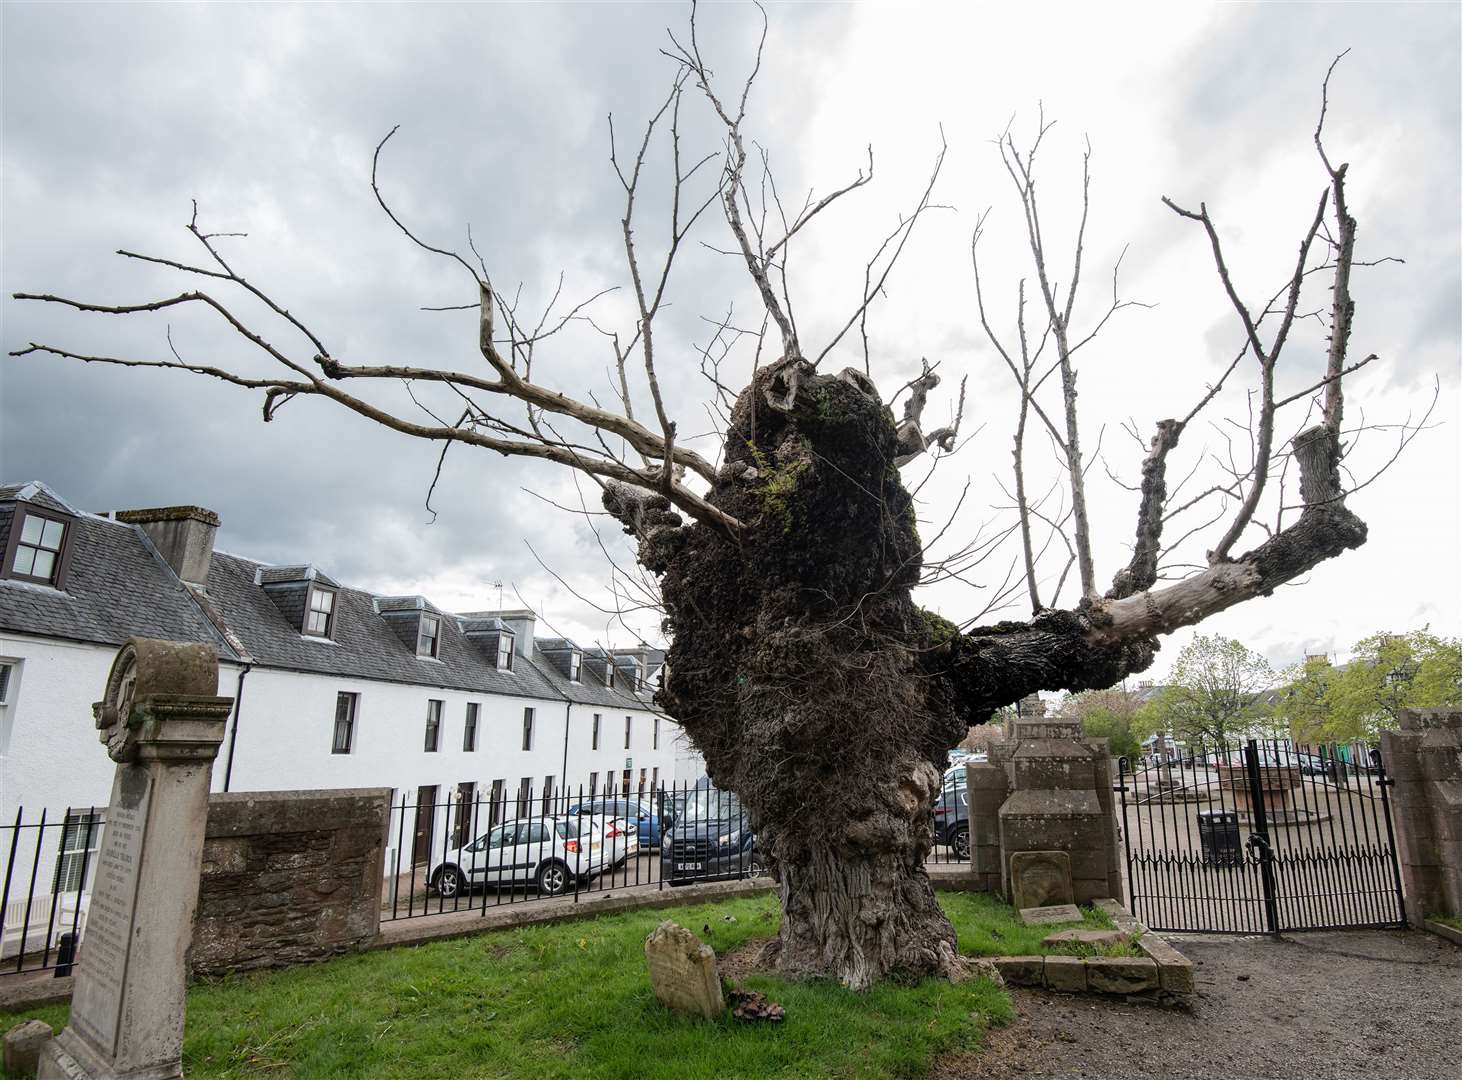 The Beauly Elm is more than 800 years old.